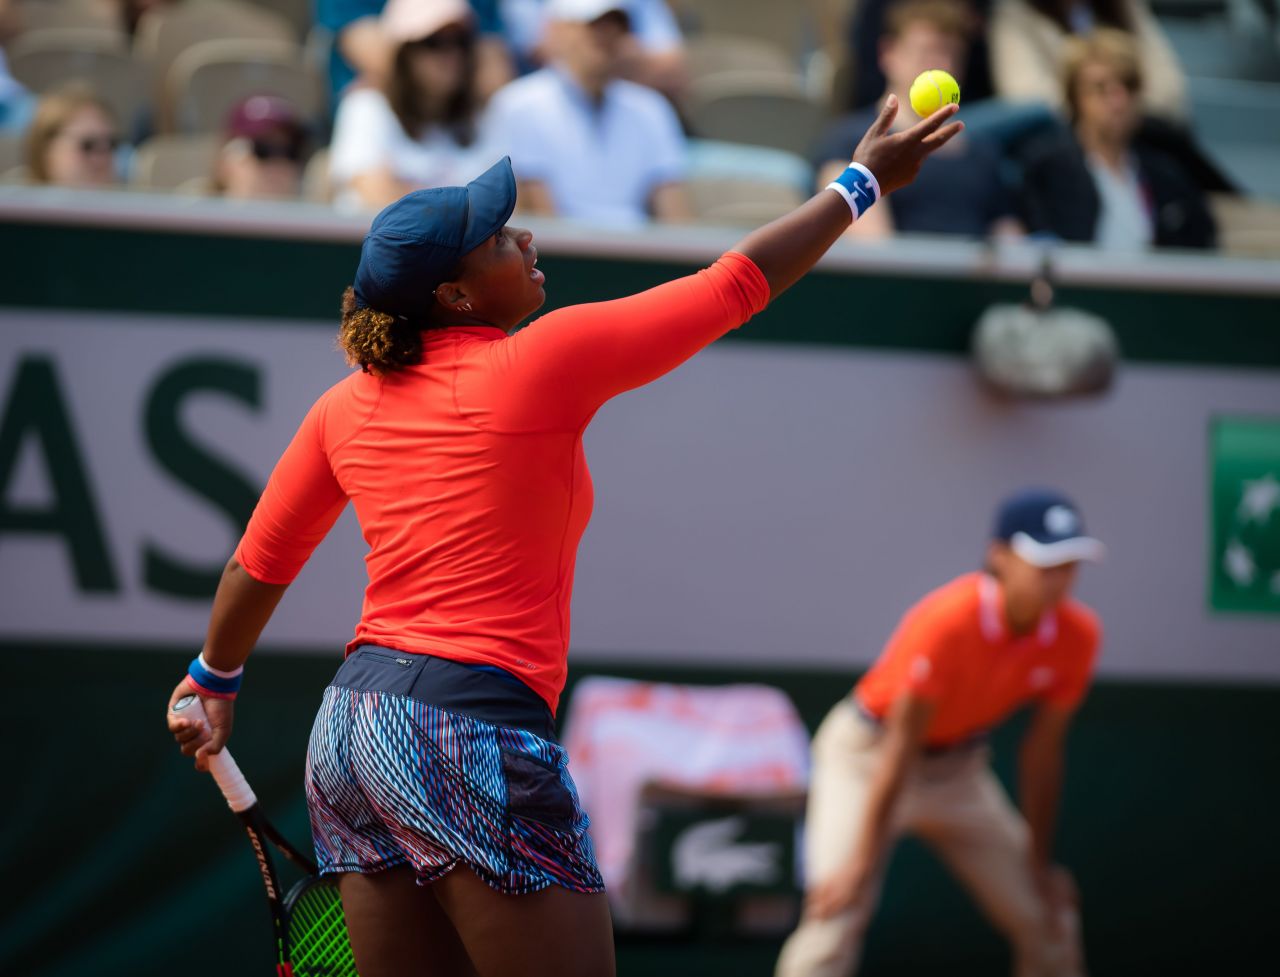 Taylor Townsend – Roland Garros French Open 05/26/2019